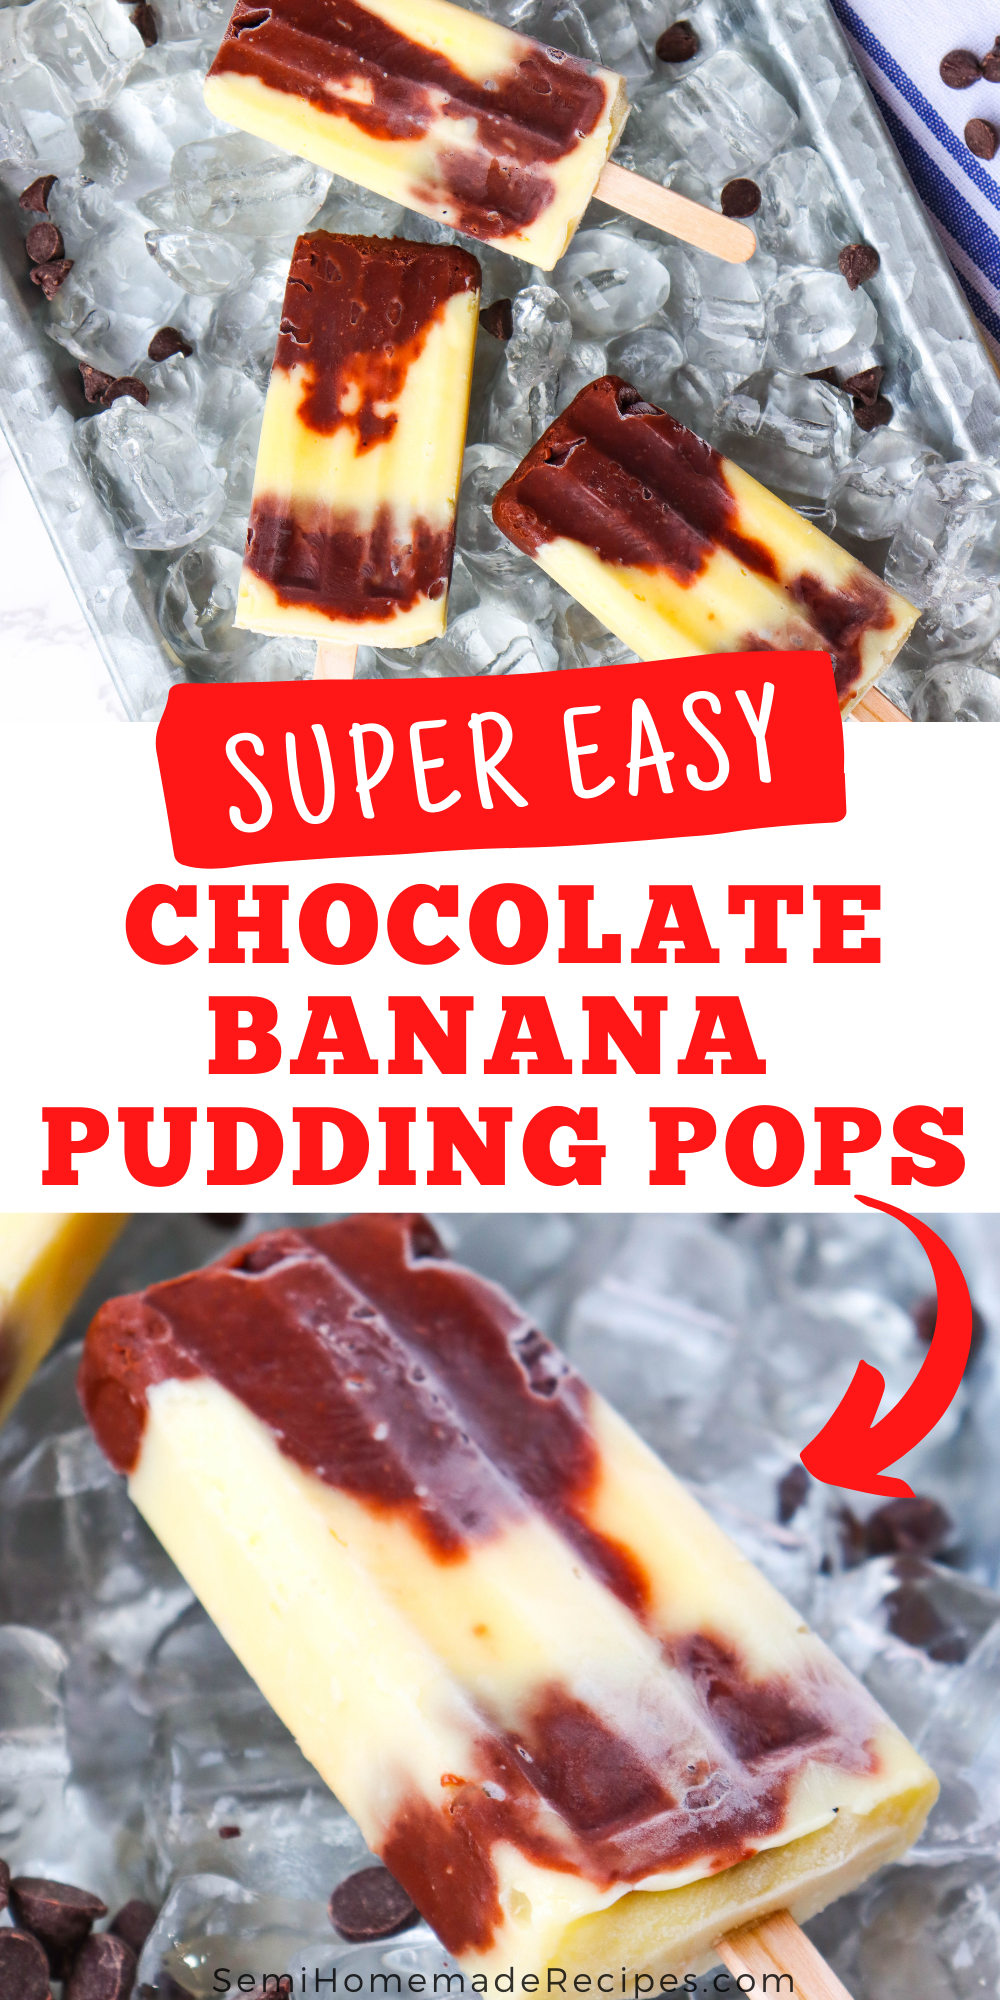 Layers of Chocolate pudding and layers of banana pudding make up these fun homemade frozen Chocolate Banana Pudding Pops! 